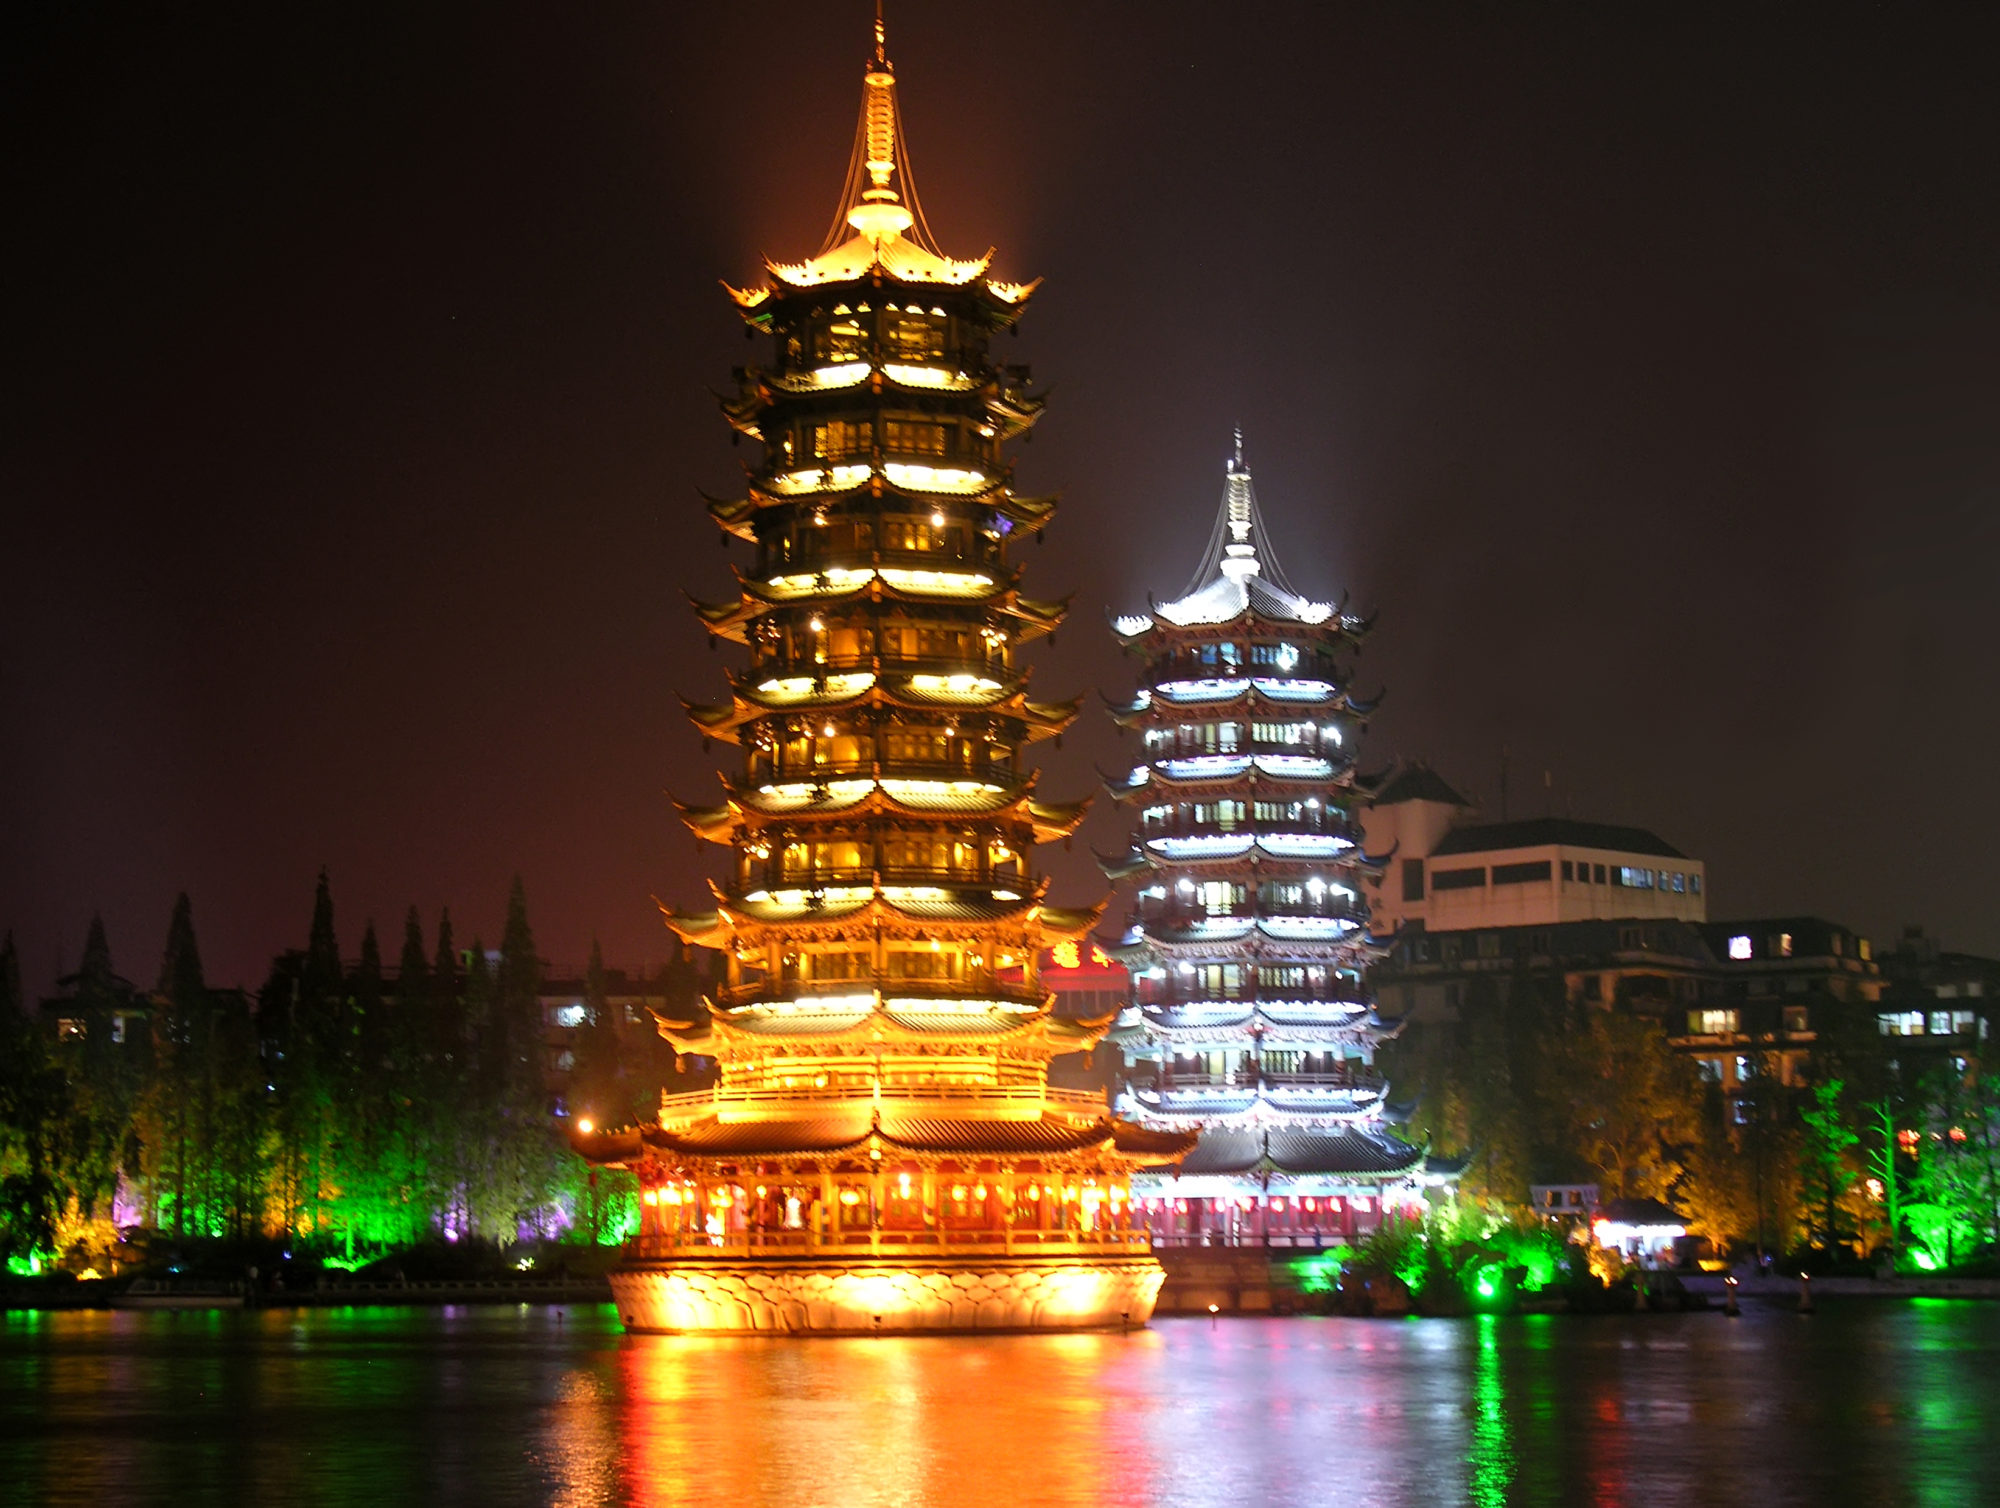 Sun and Moon Towers in Guilin